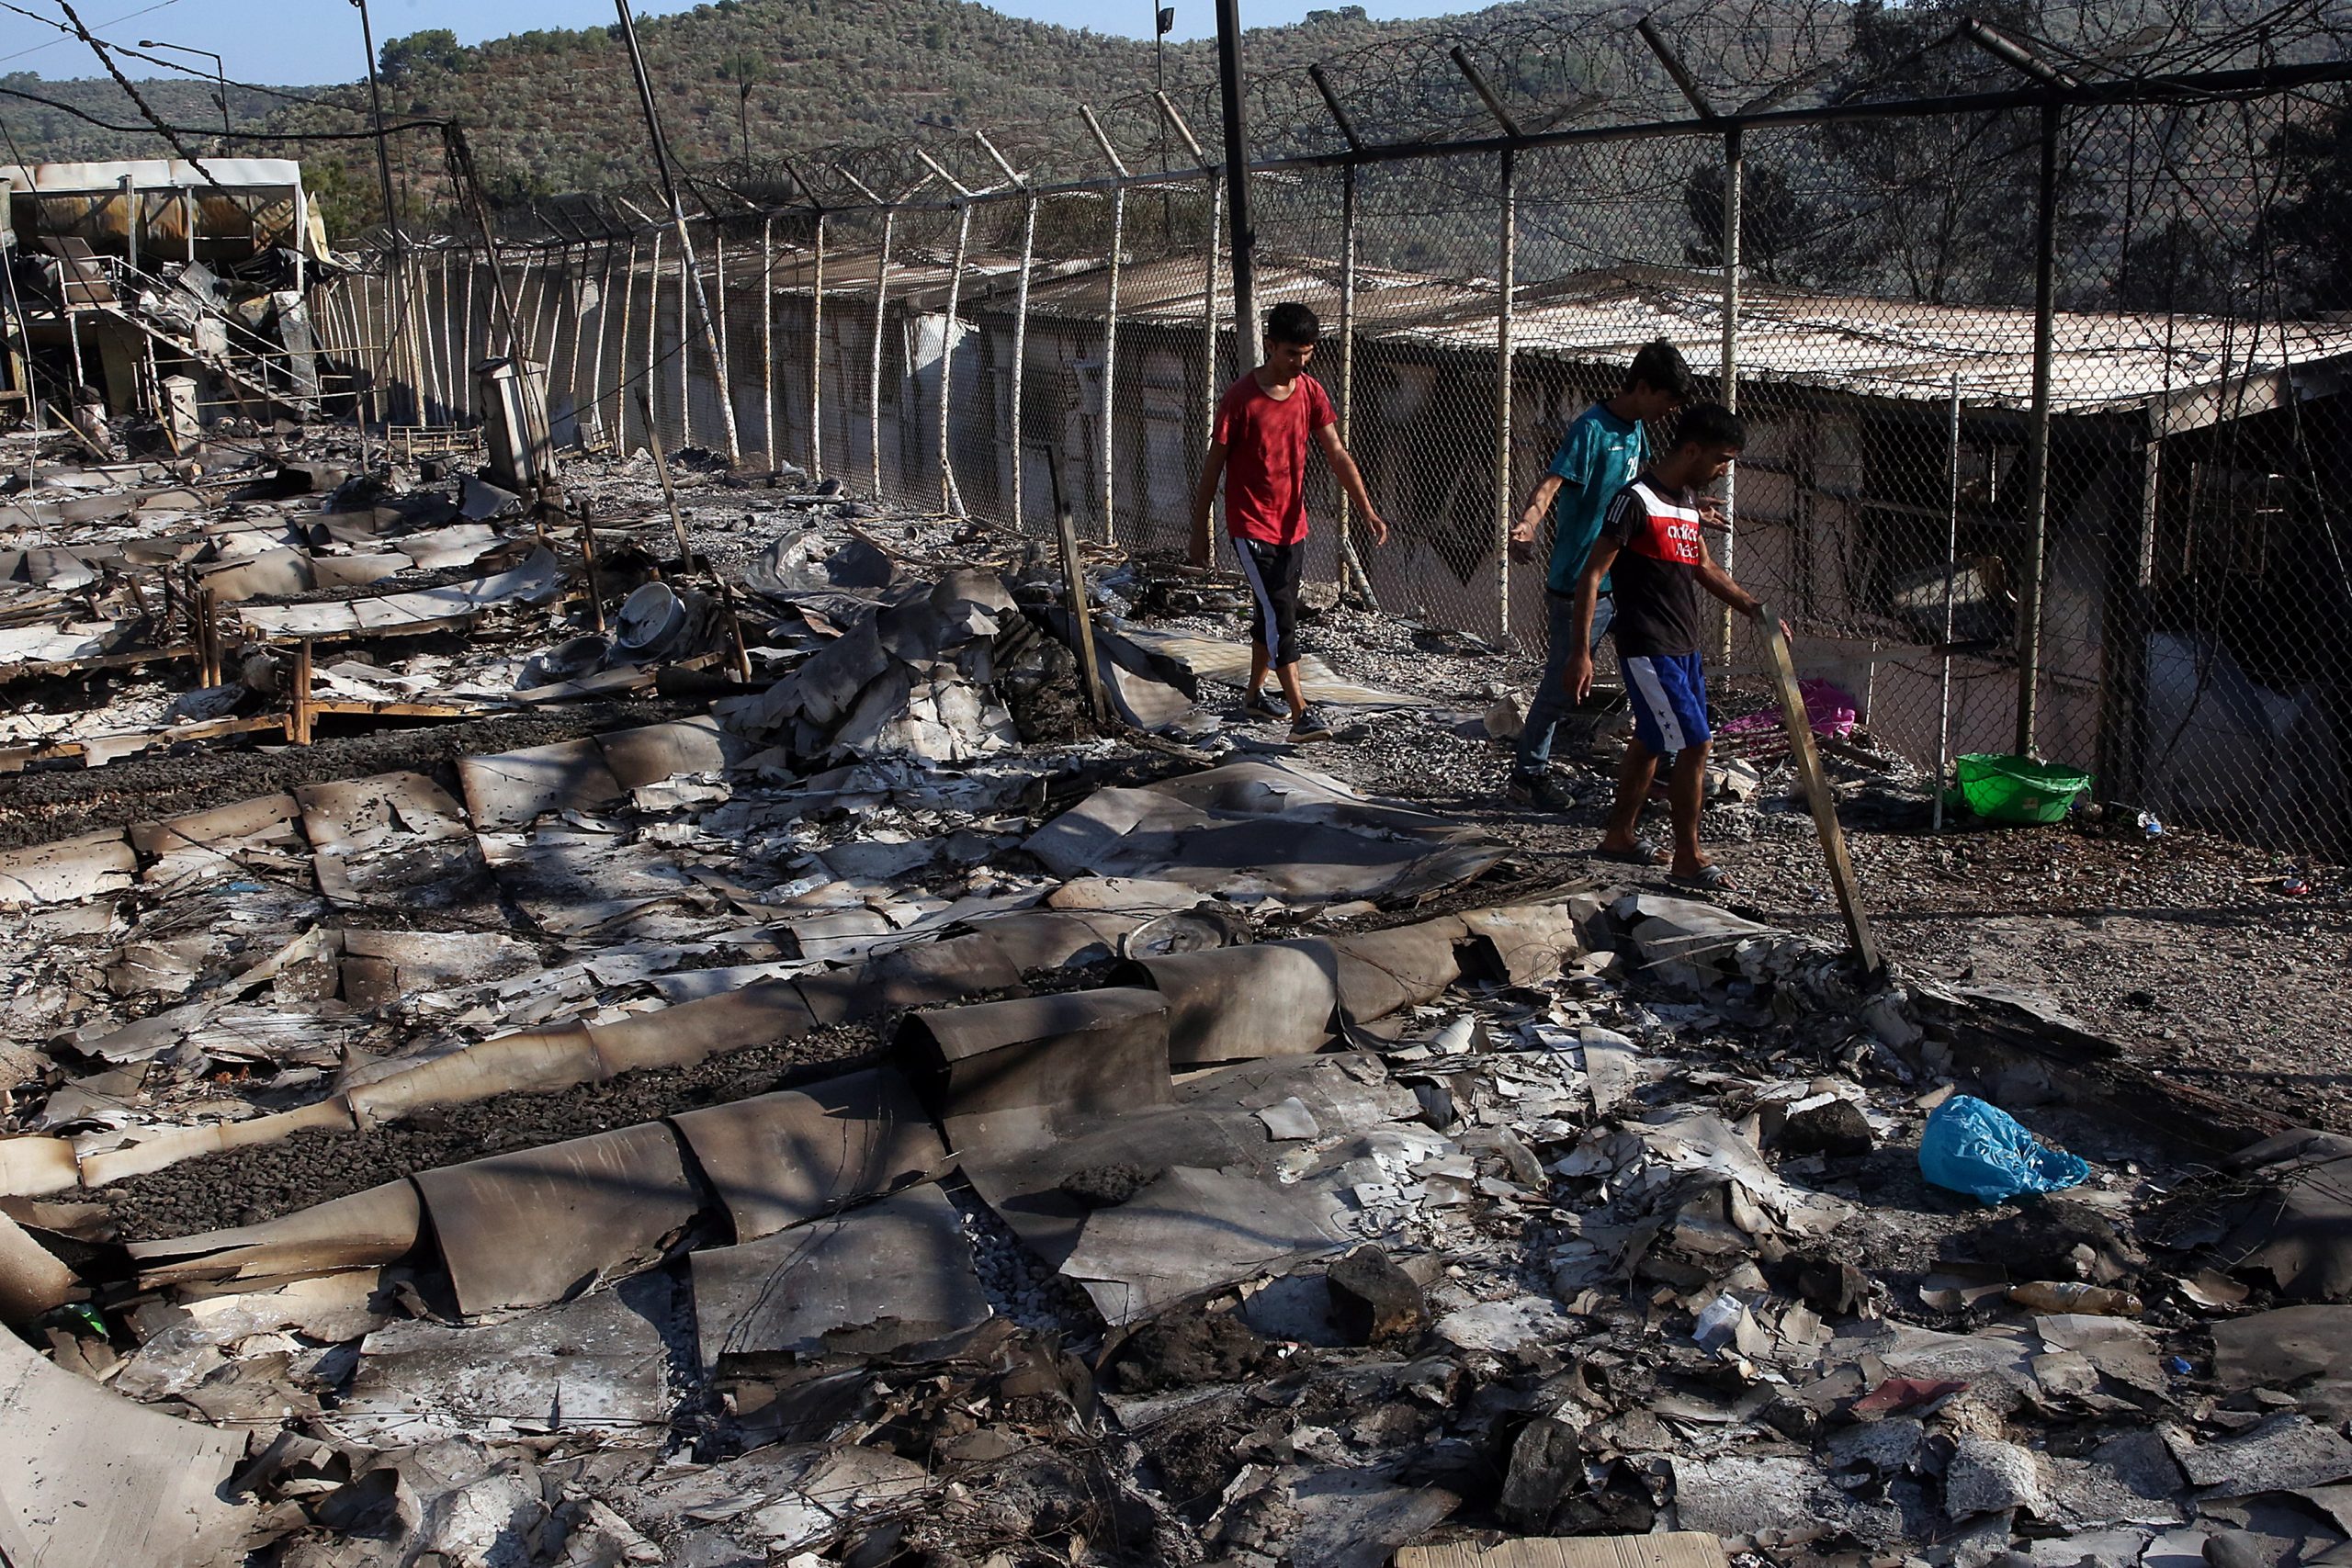 epa08656942 Asylum seekers walk among debris in the Moria refugees camp on the island of Lesbos, Greece, 09 September 2020. According to reports, a fire broke out at Moria Camp early on 09 September, after approximately 35 refugees, who had tested positive for COVID-19, refused to move into isolation with their families.  EPA/ORESTIS PANAGIOTOU